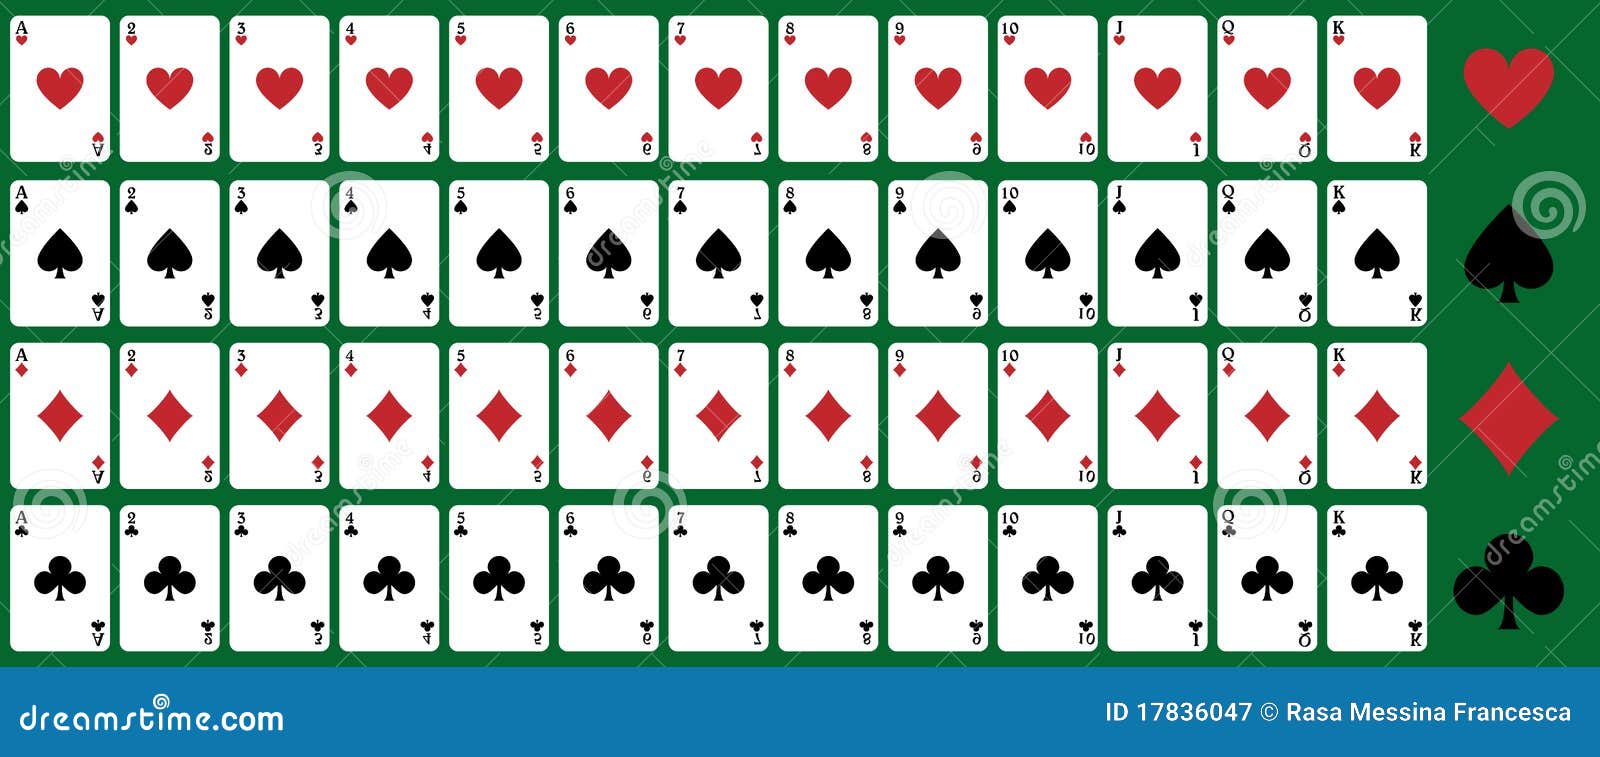 Playing cards images download